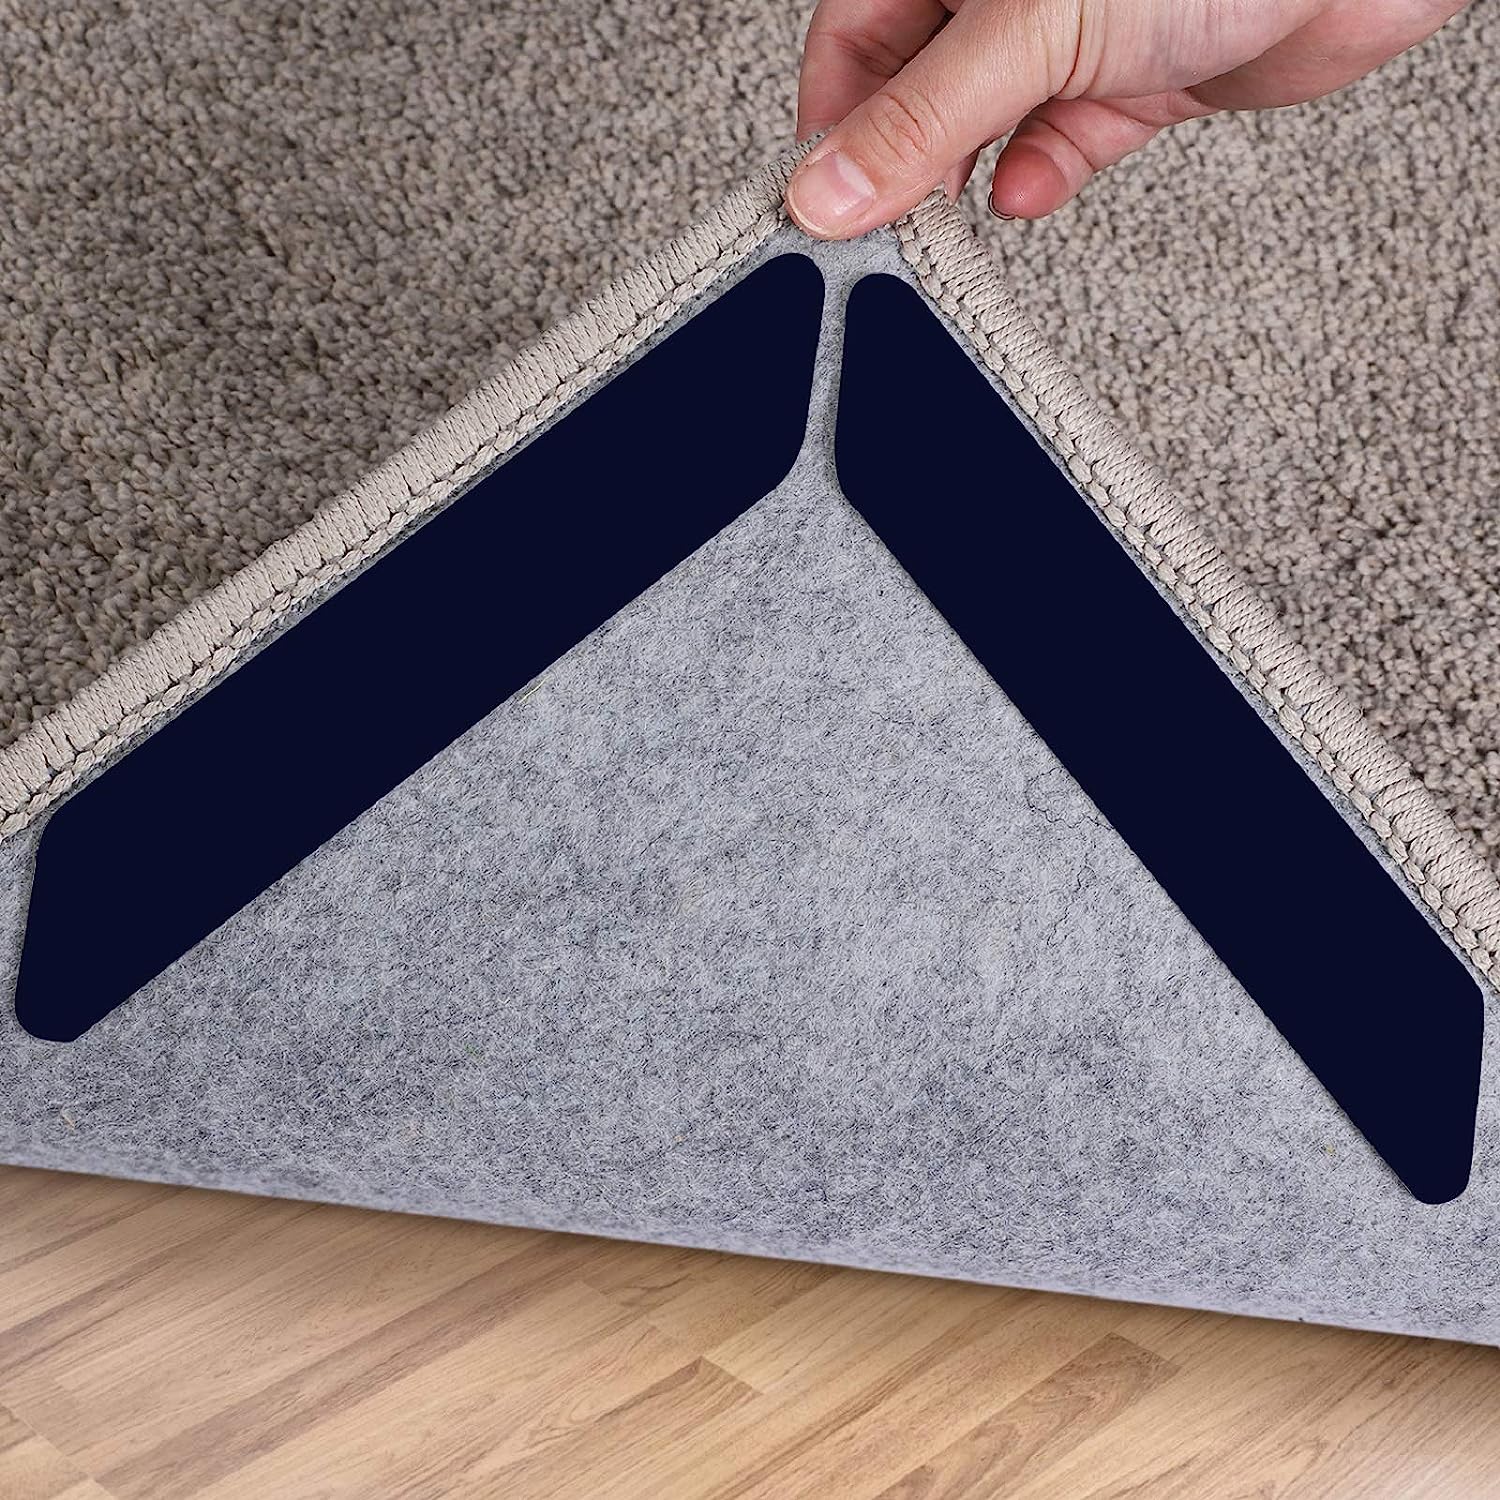 8pcs Carpet Tape Non Slip Rug Tape Reusable Rug Pad Gripper for Area Rugs  Dual Sided Adhesive Rug Sticker Keep Corners Flat